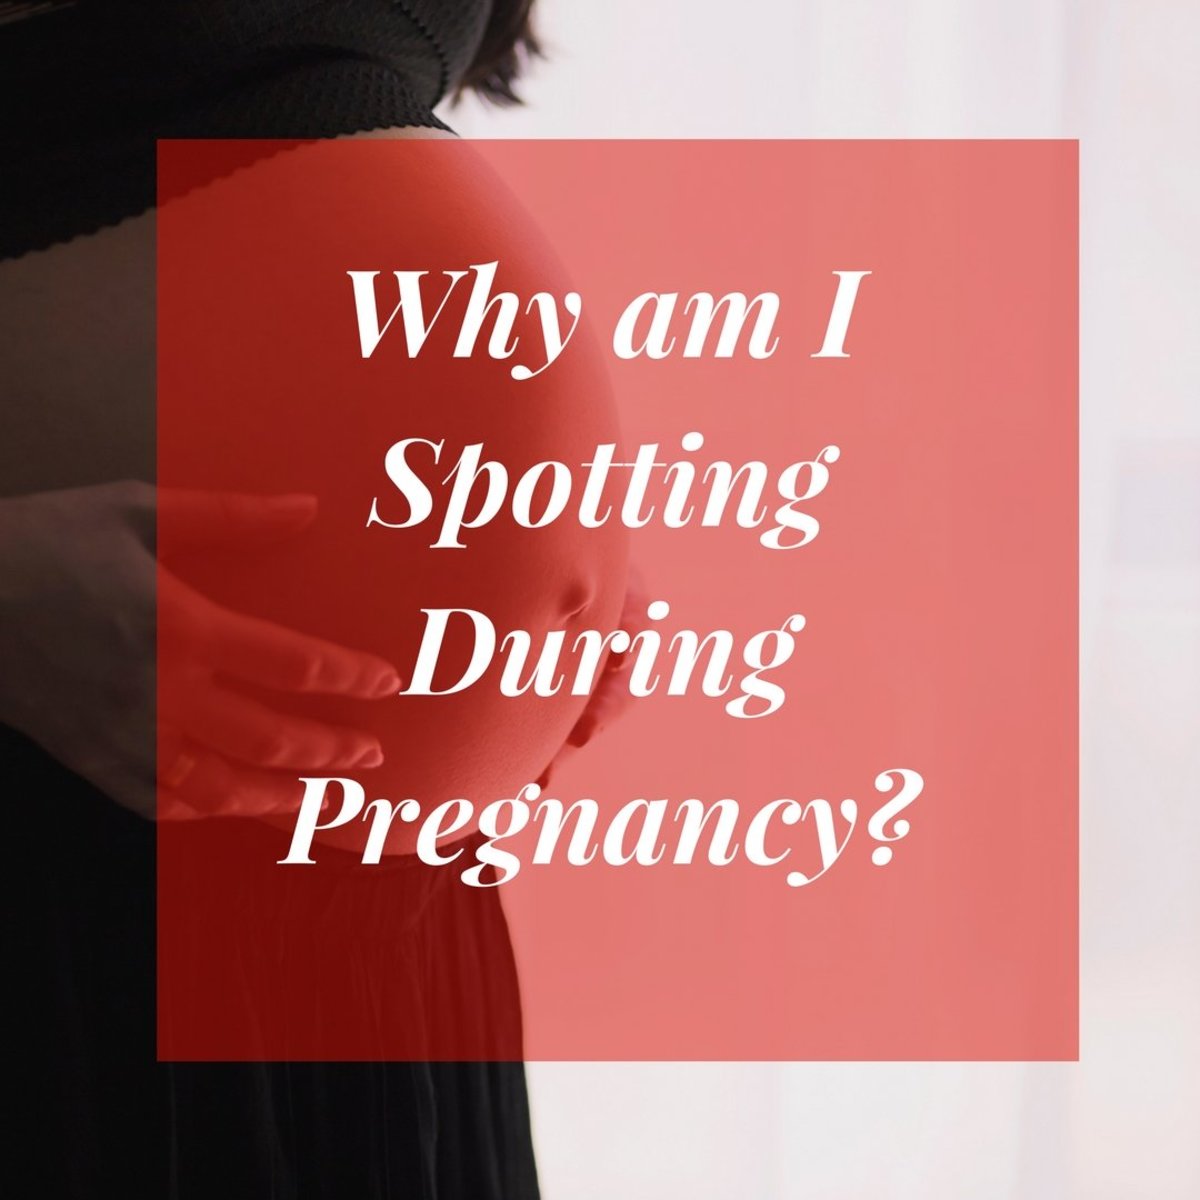 bloody-shows-mucous-plugs-pregnancy-bleeding-discharge